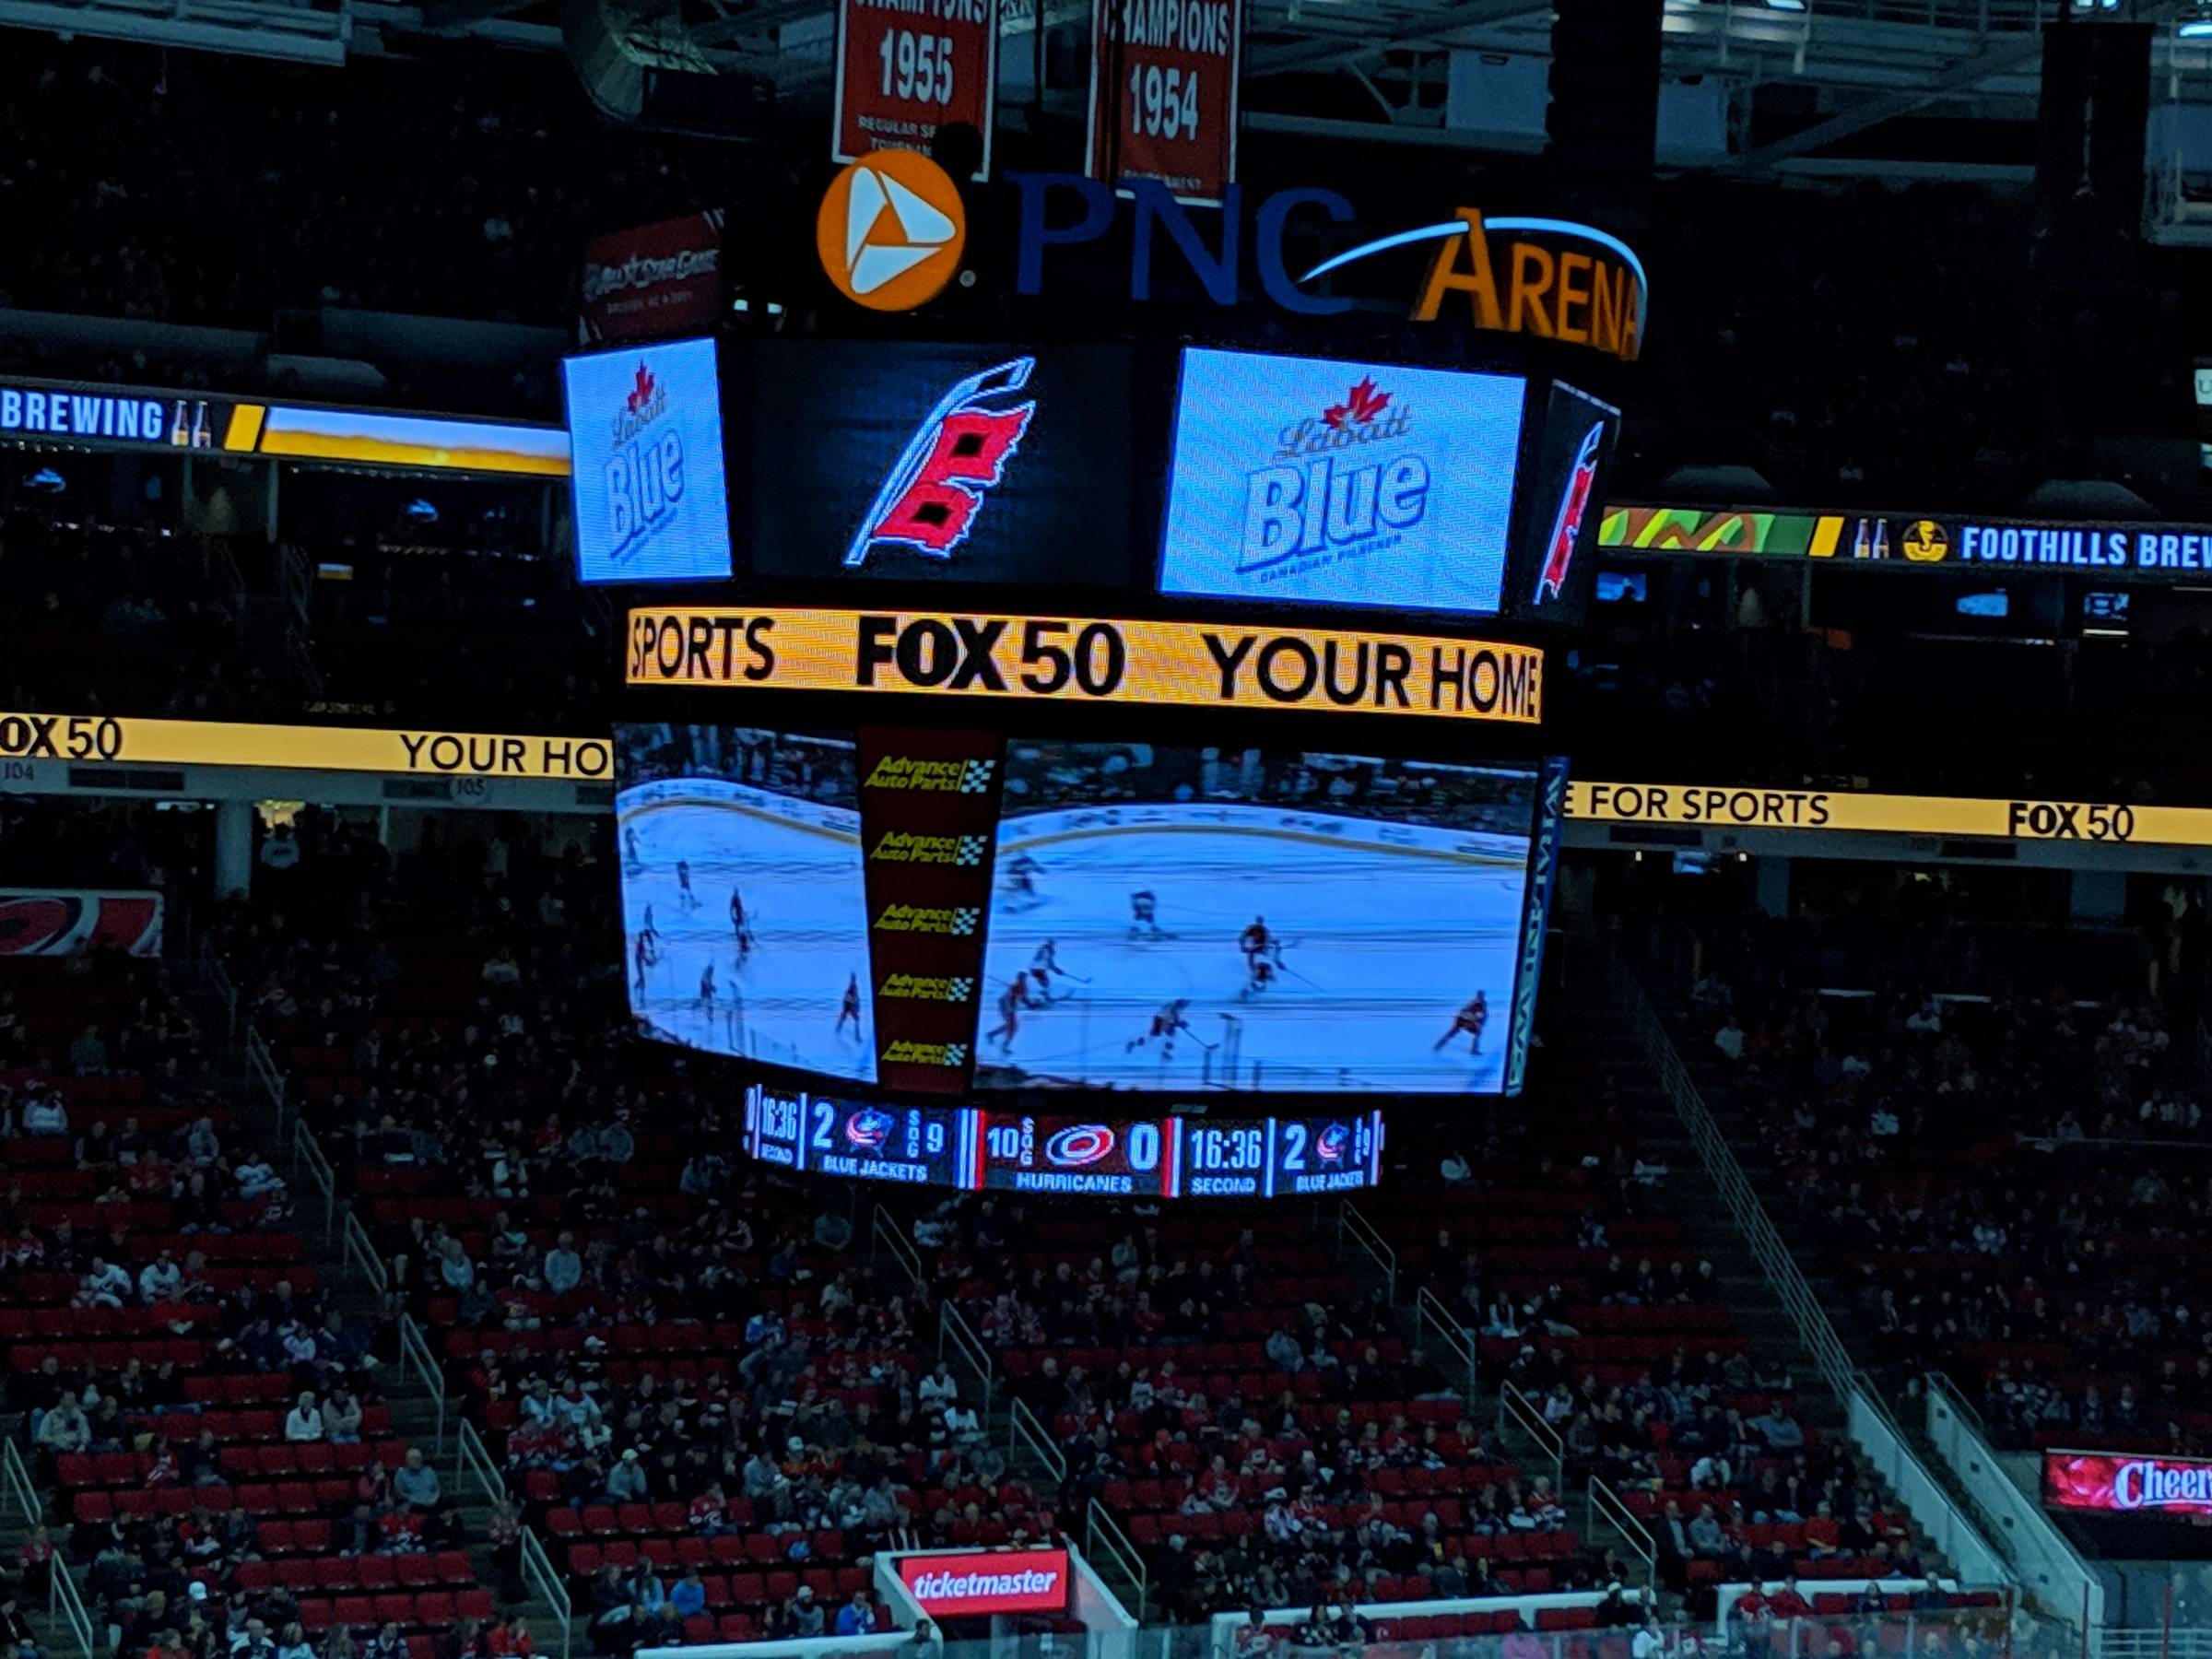 jumbotron at PNC Arena in Raleigh